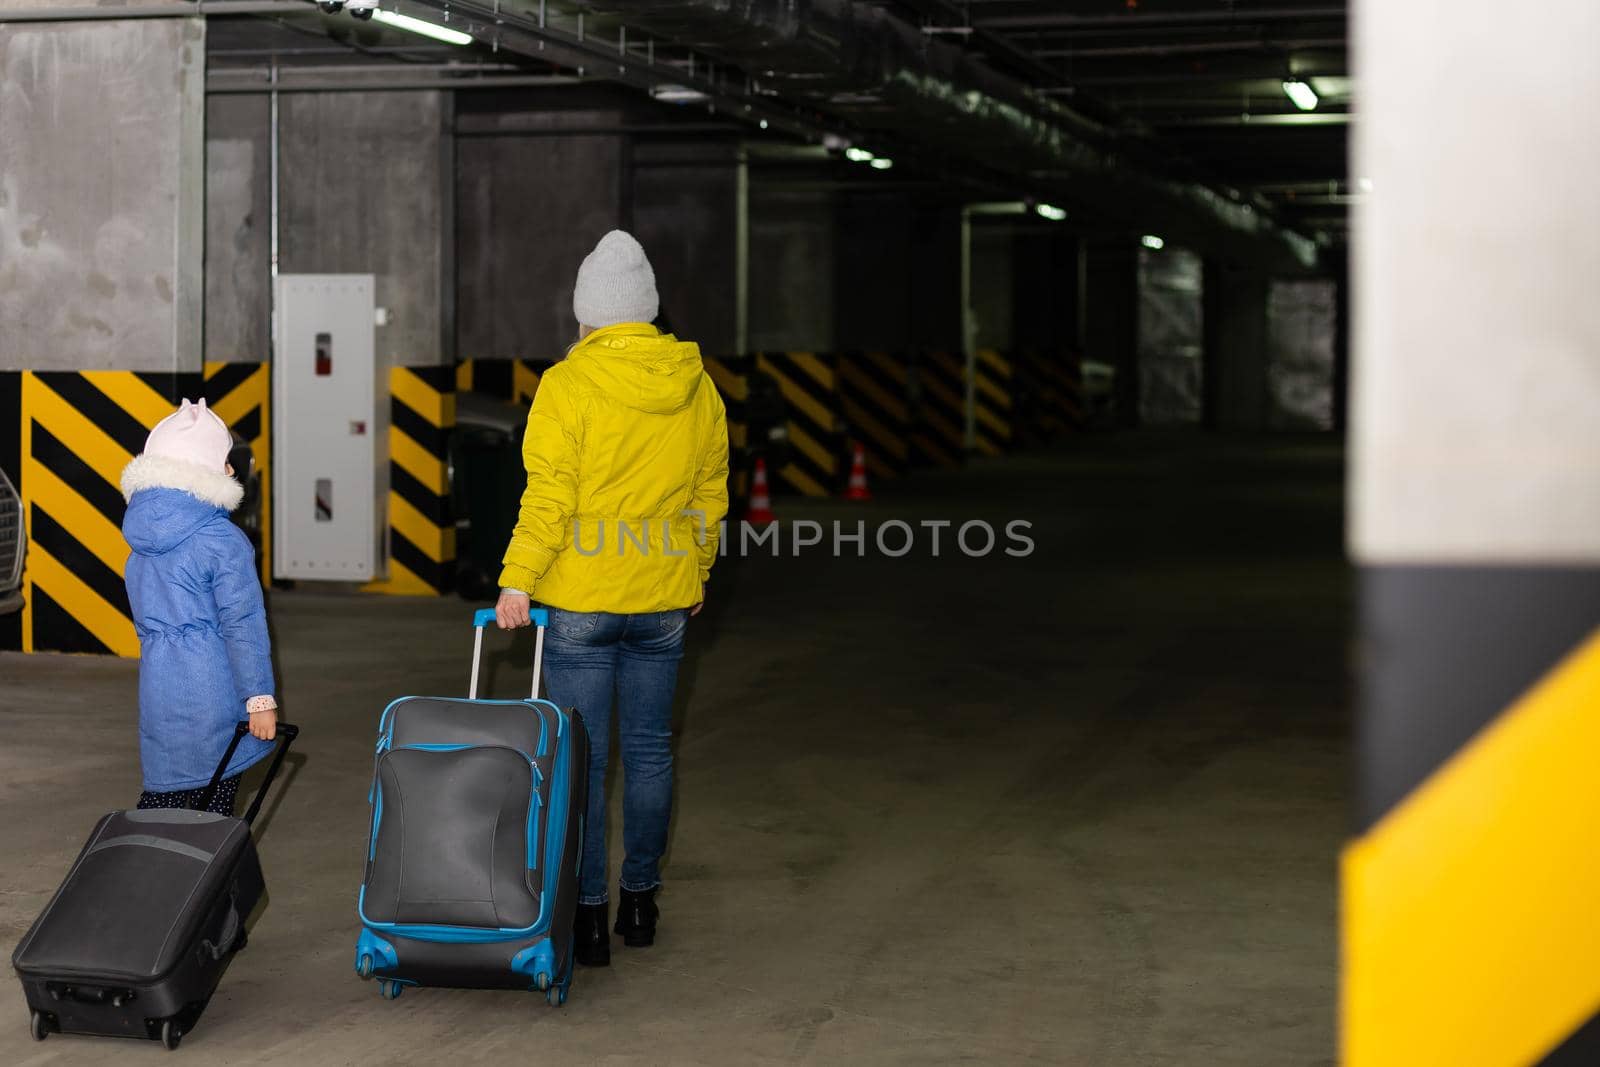 mother and daughter with luggage on wheels in underground parking by Andelov13